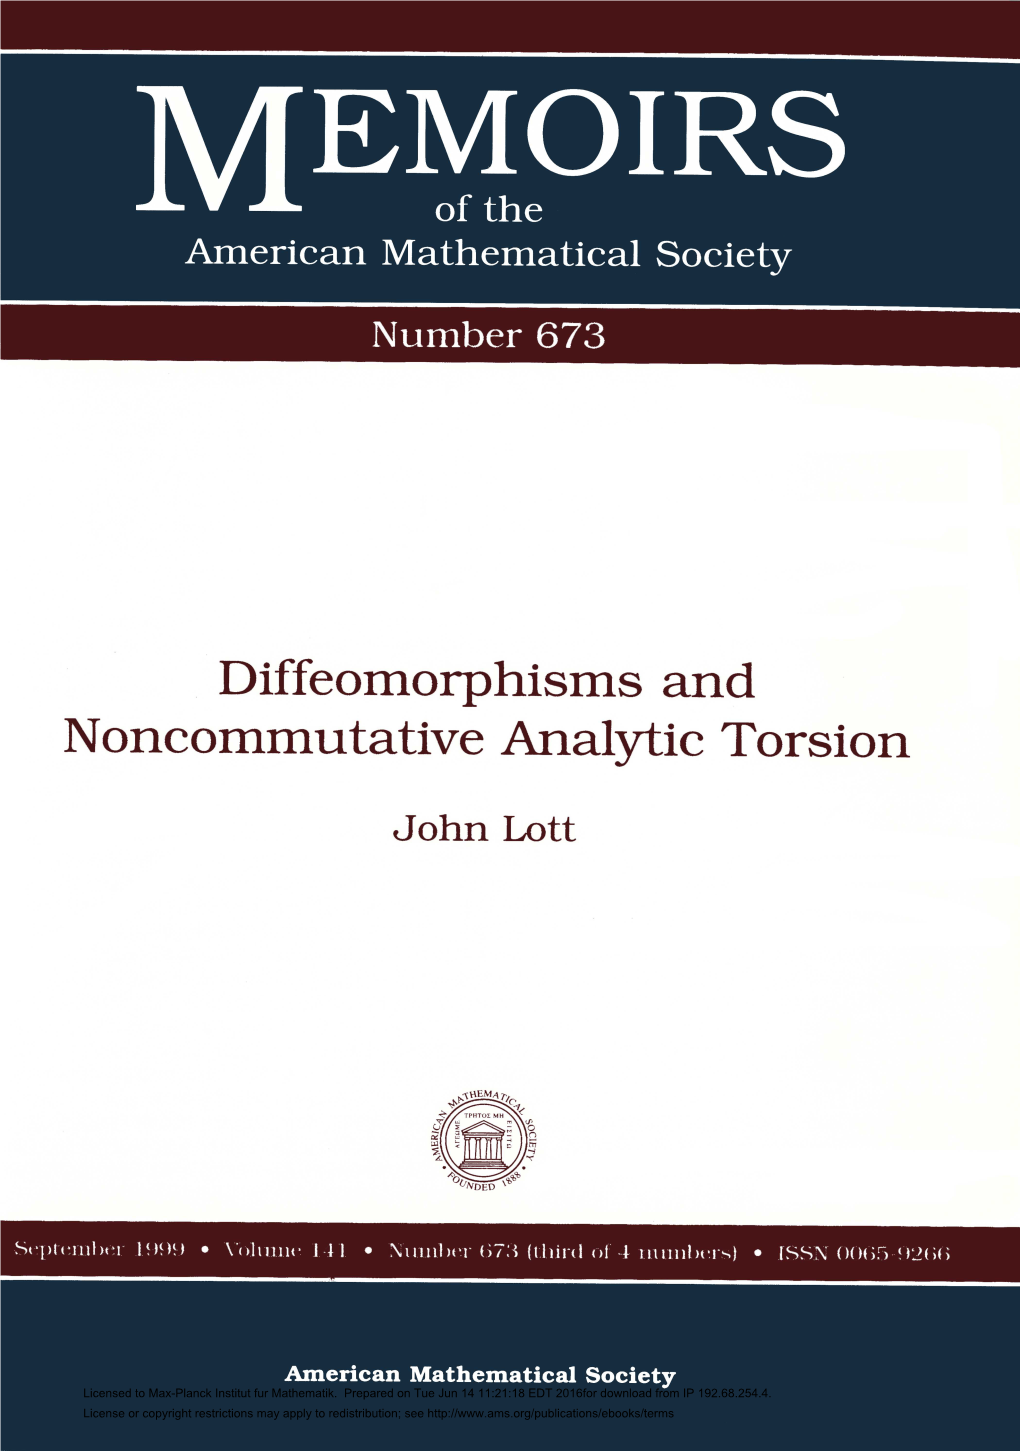 Diffeomorphisms and Noncommutative Analytic Torsion